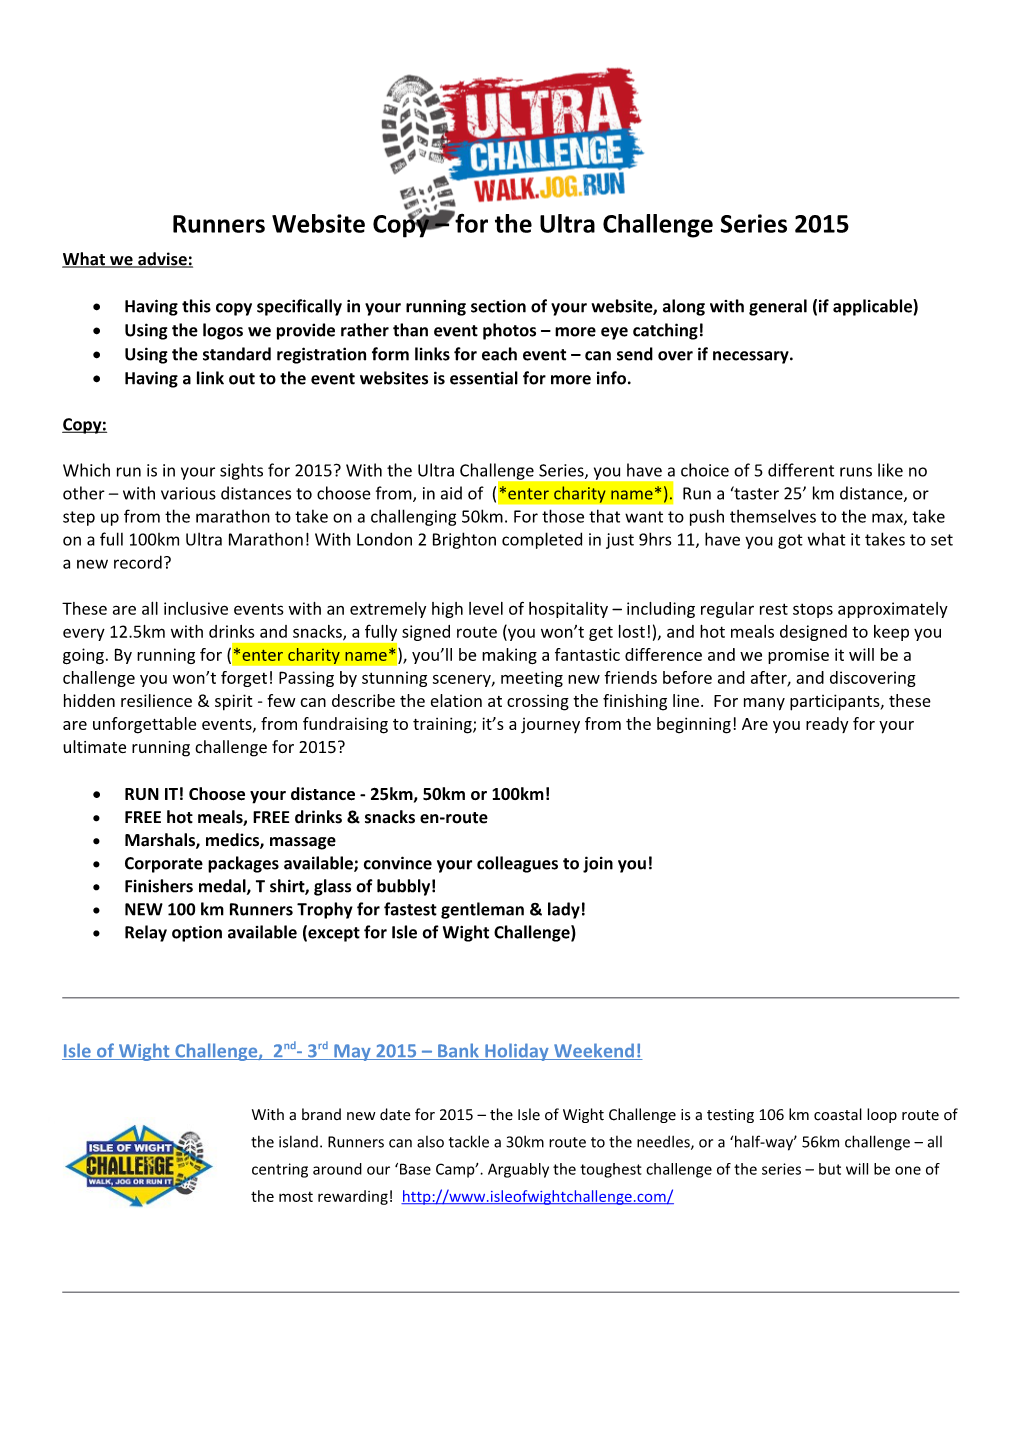 Runners Website Copy for the Ultra Challenge Series 2015